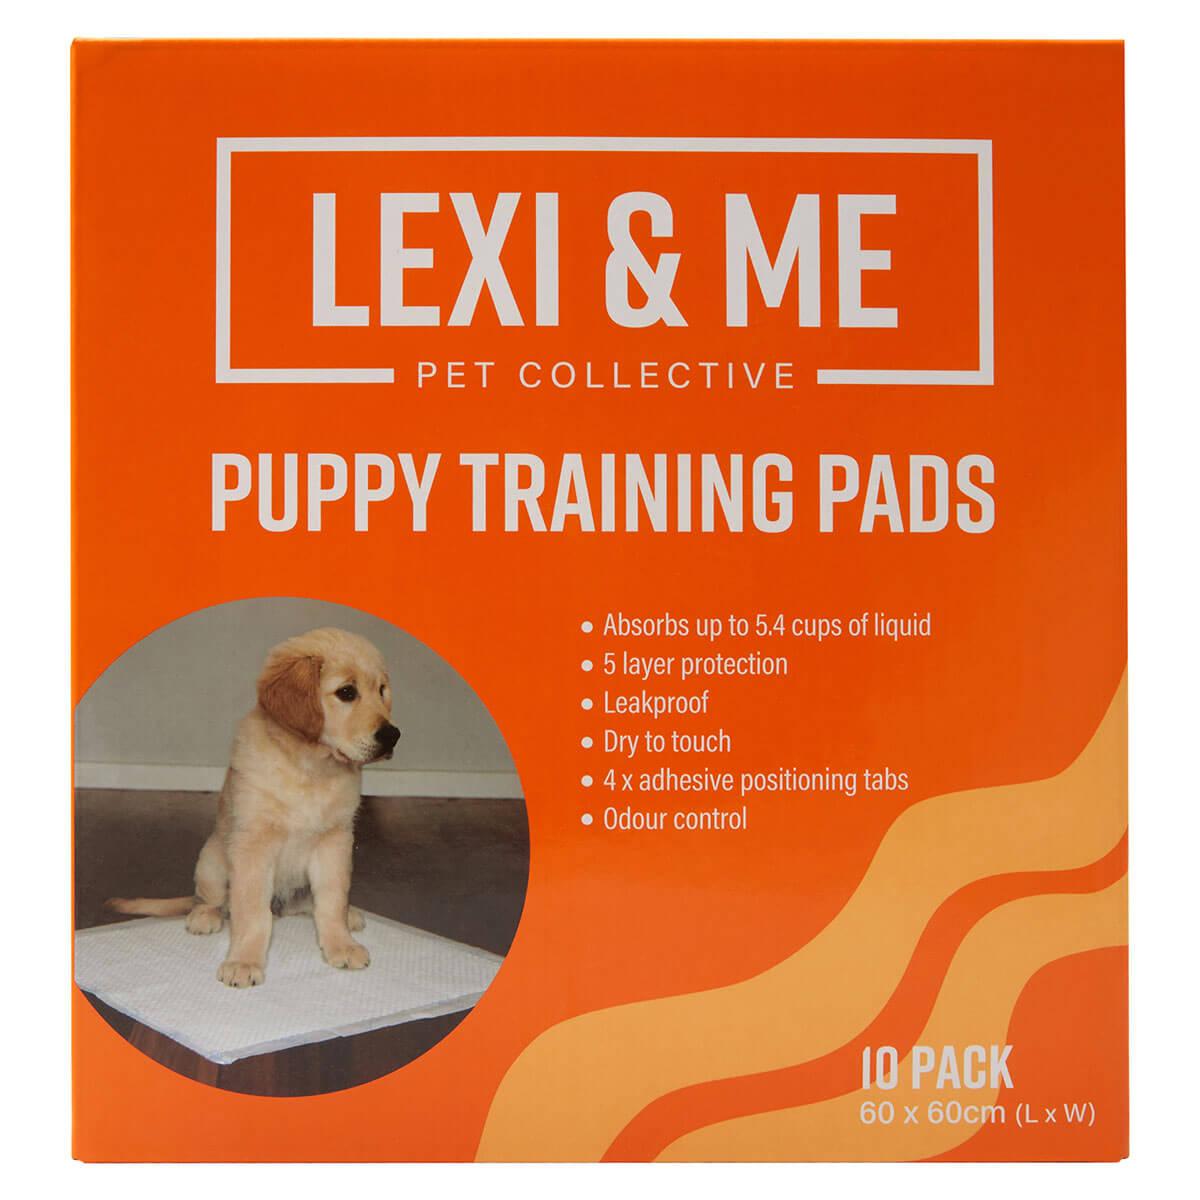 Lexi & Me Puppy Training Pads